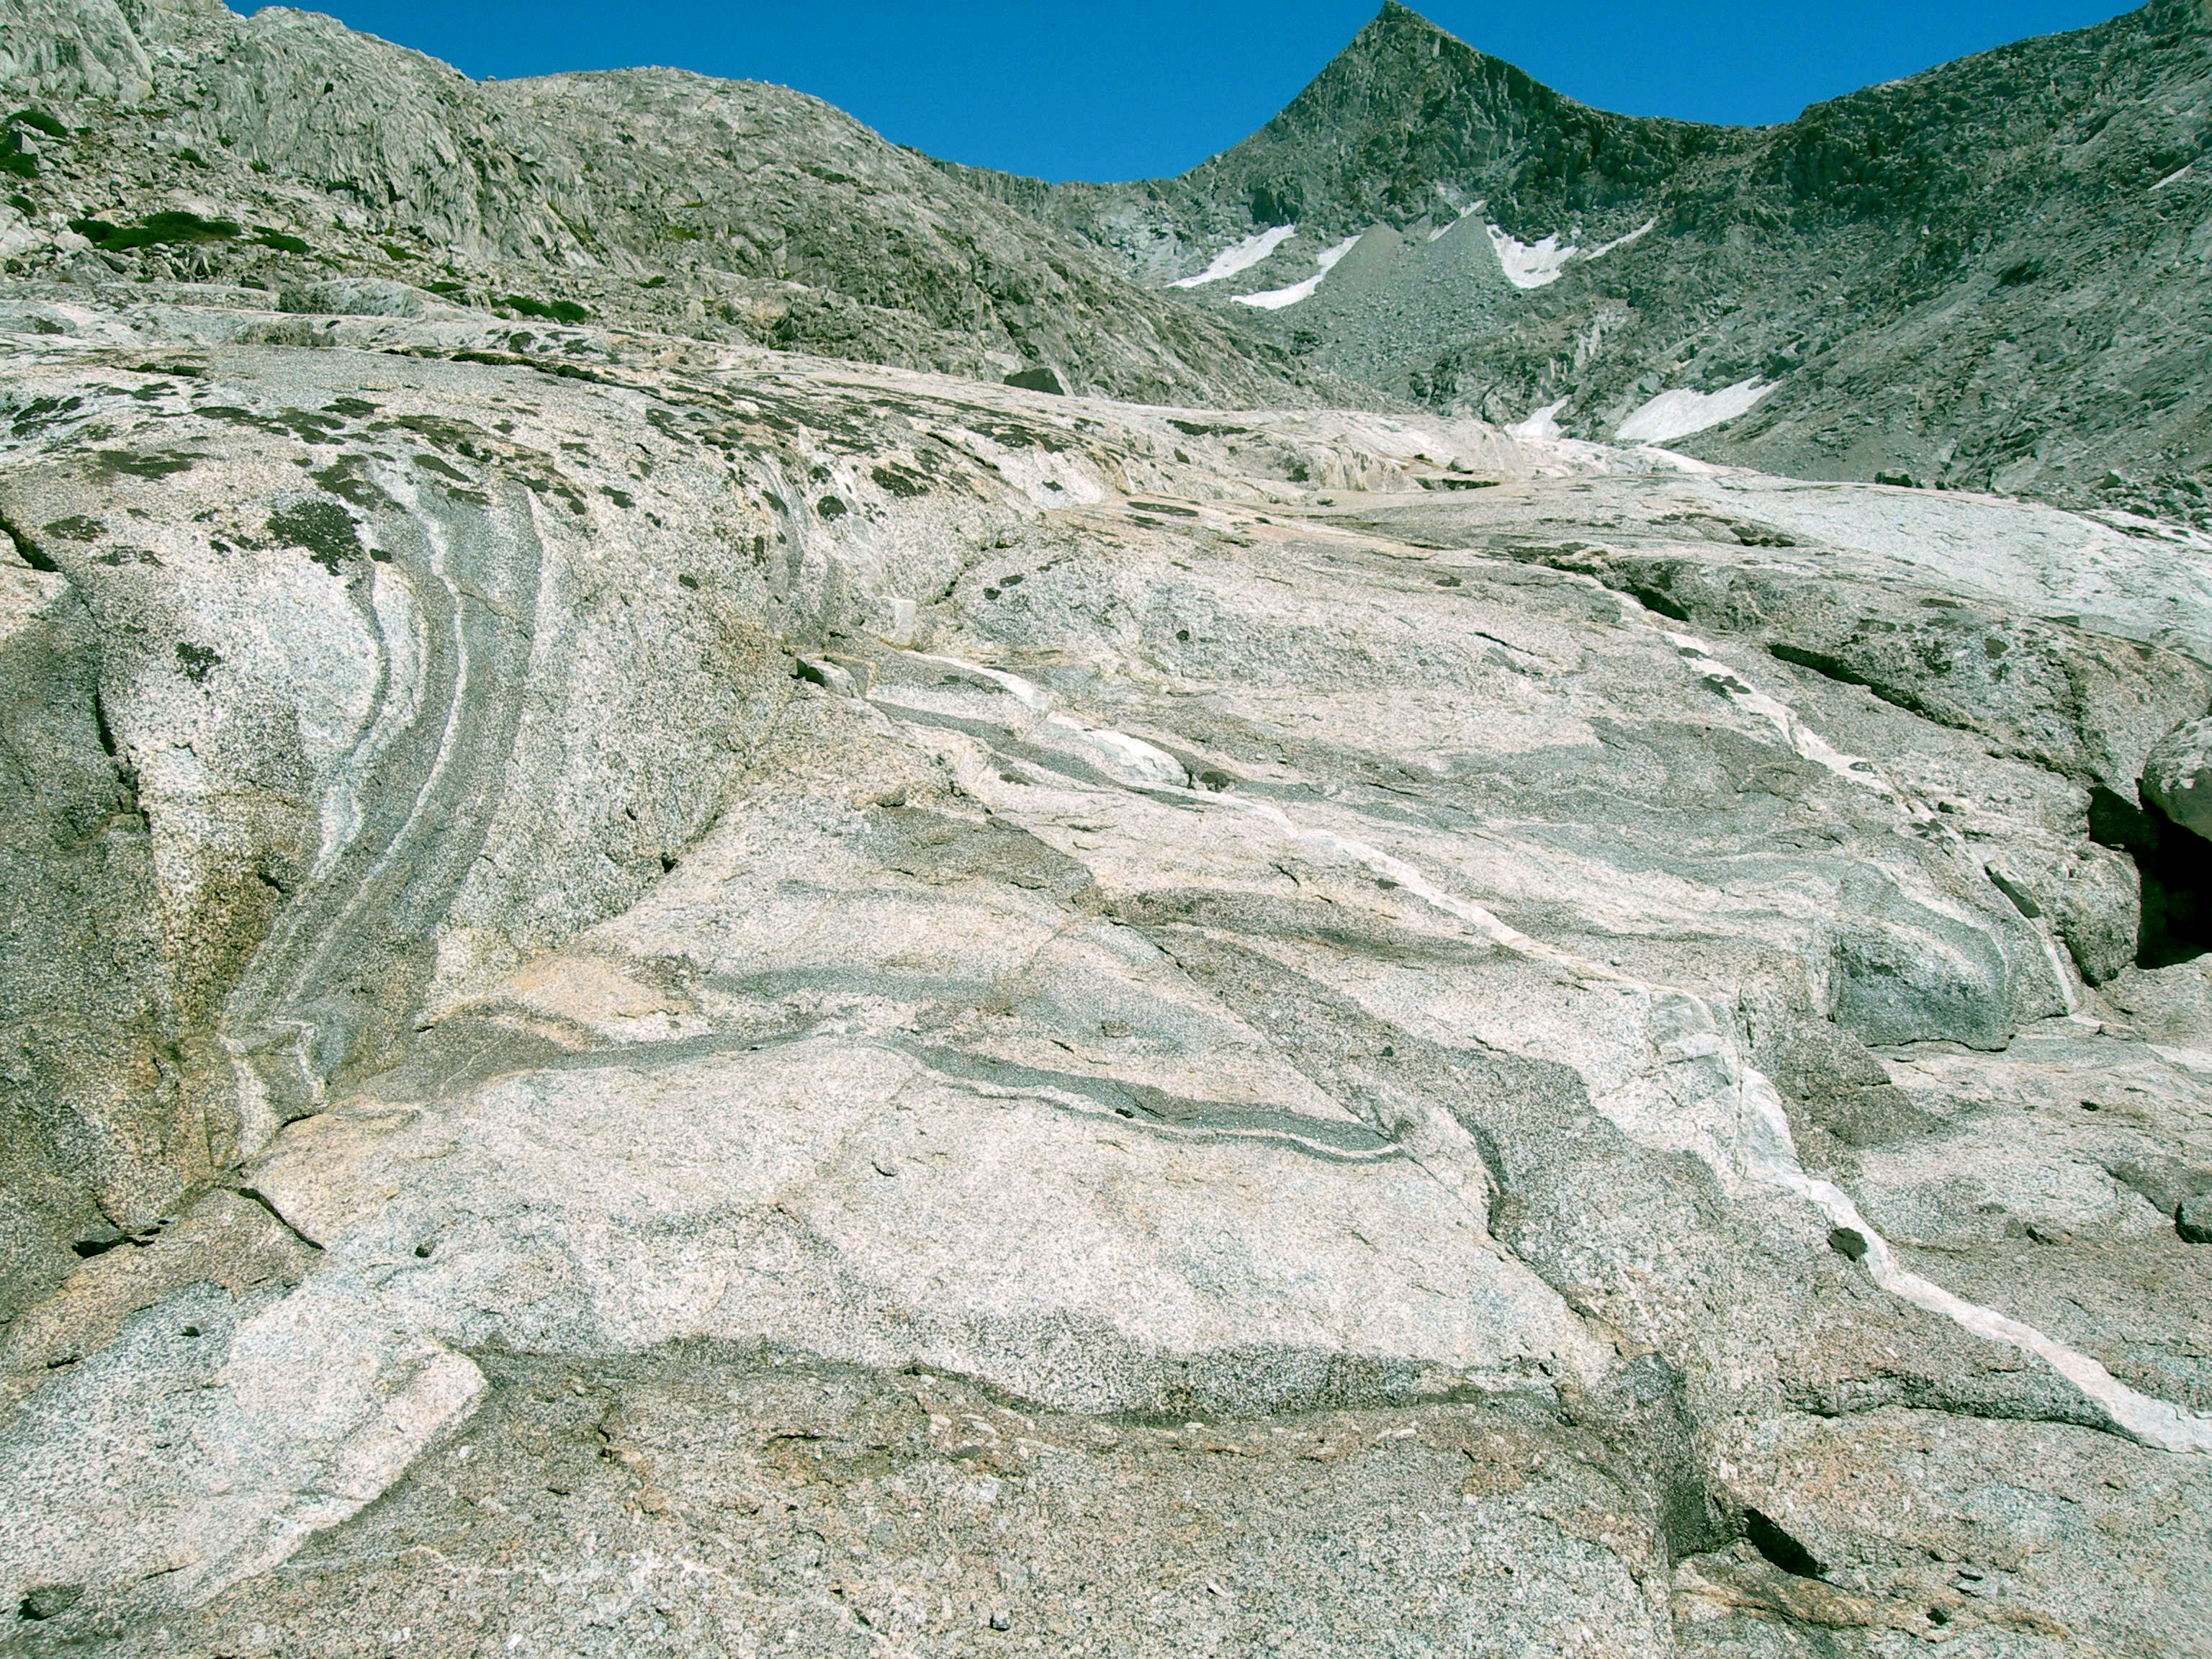 Sheared and faulted region in granite outcrop